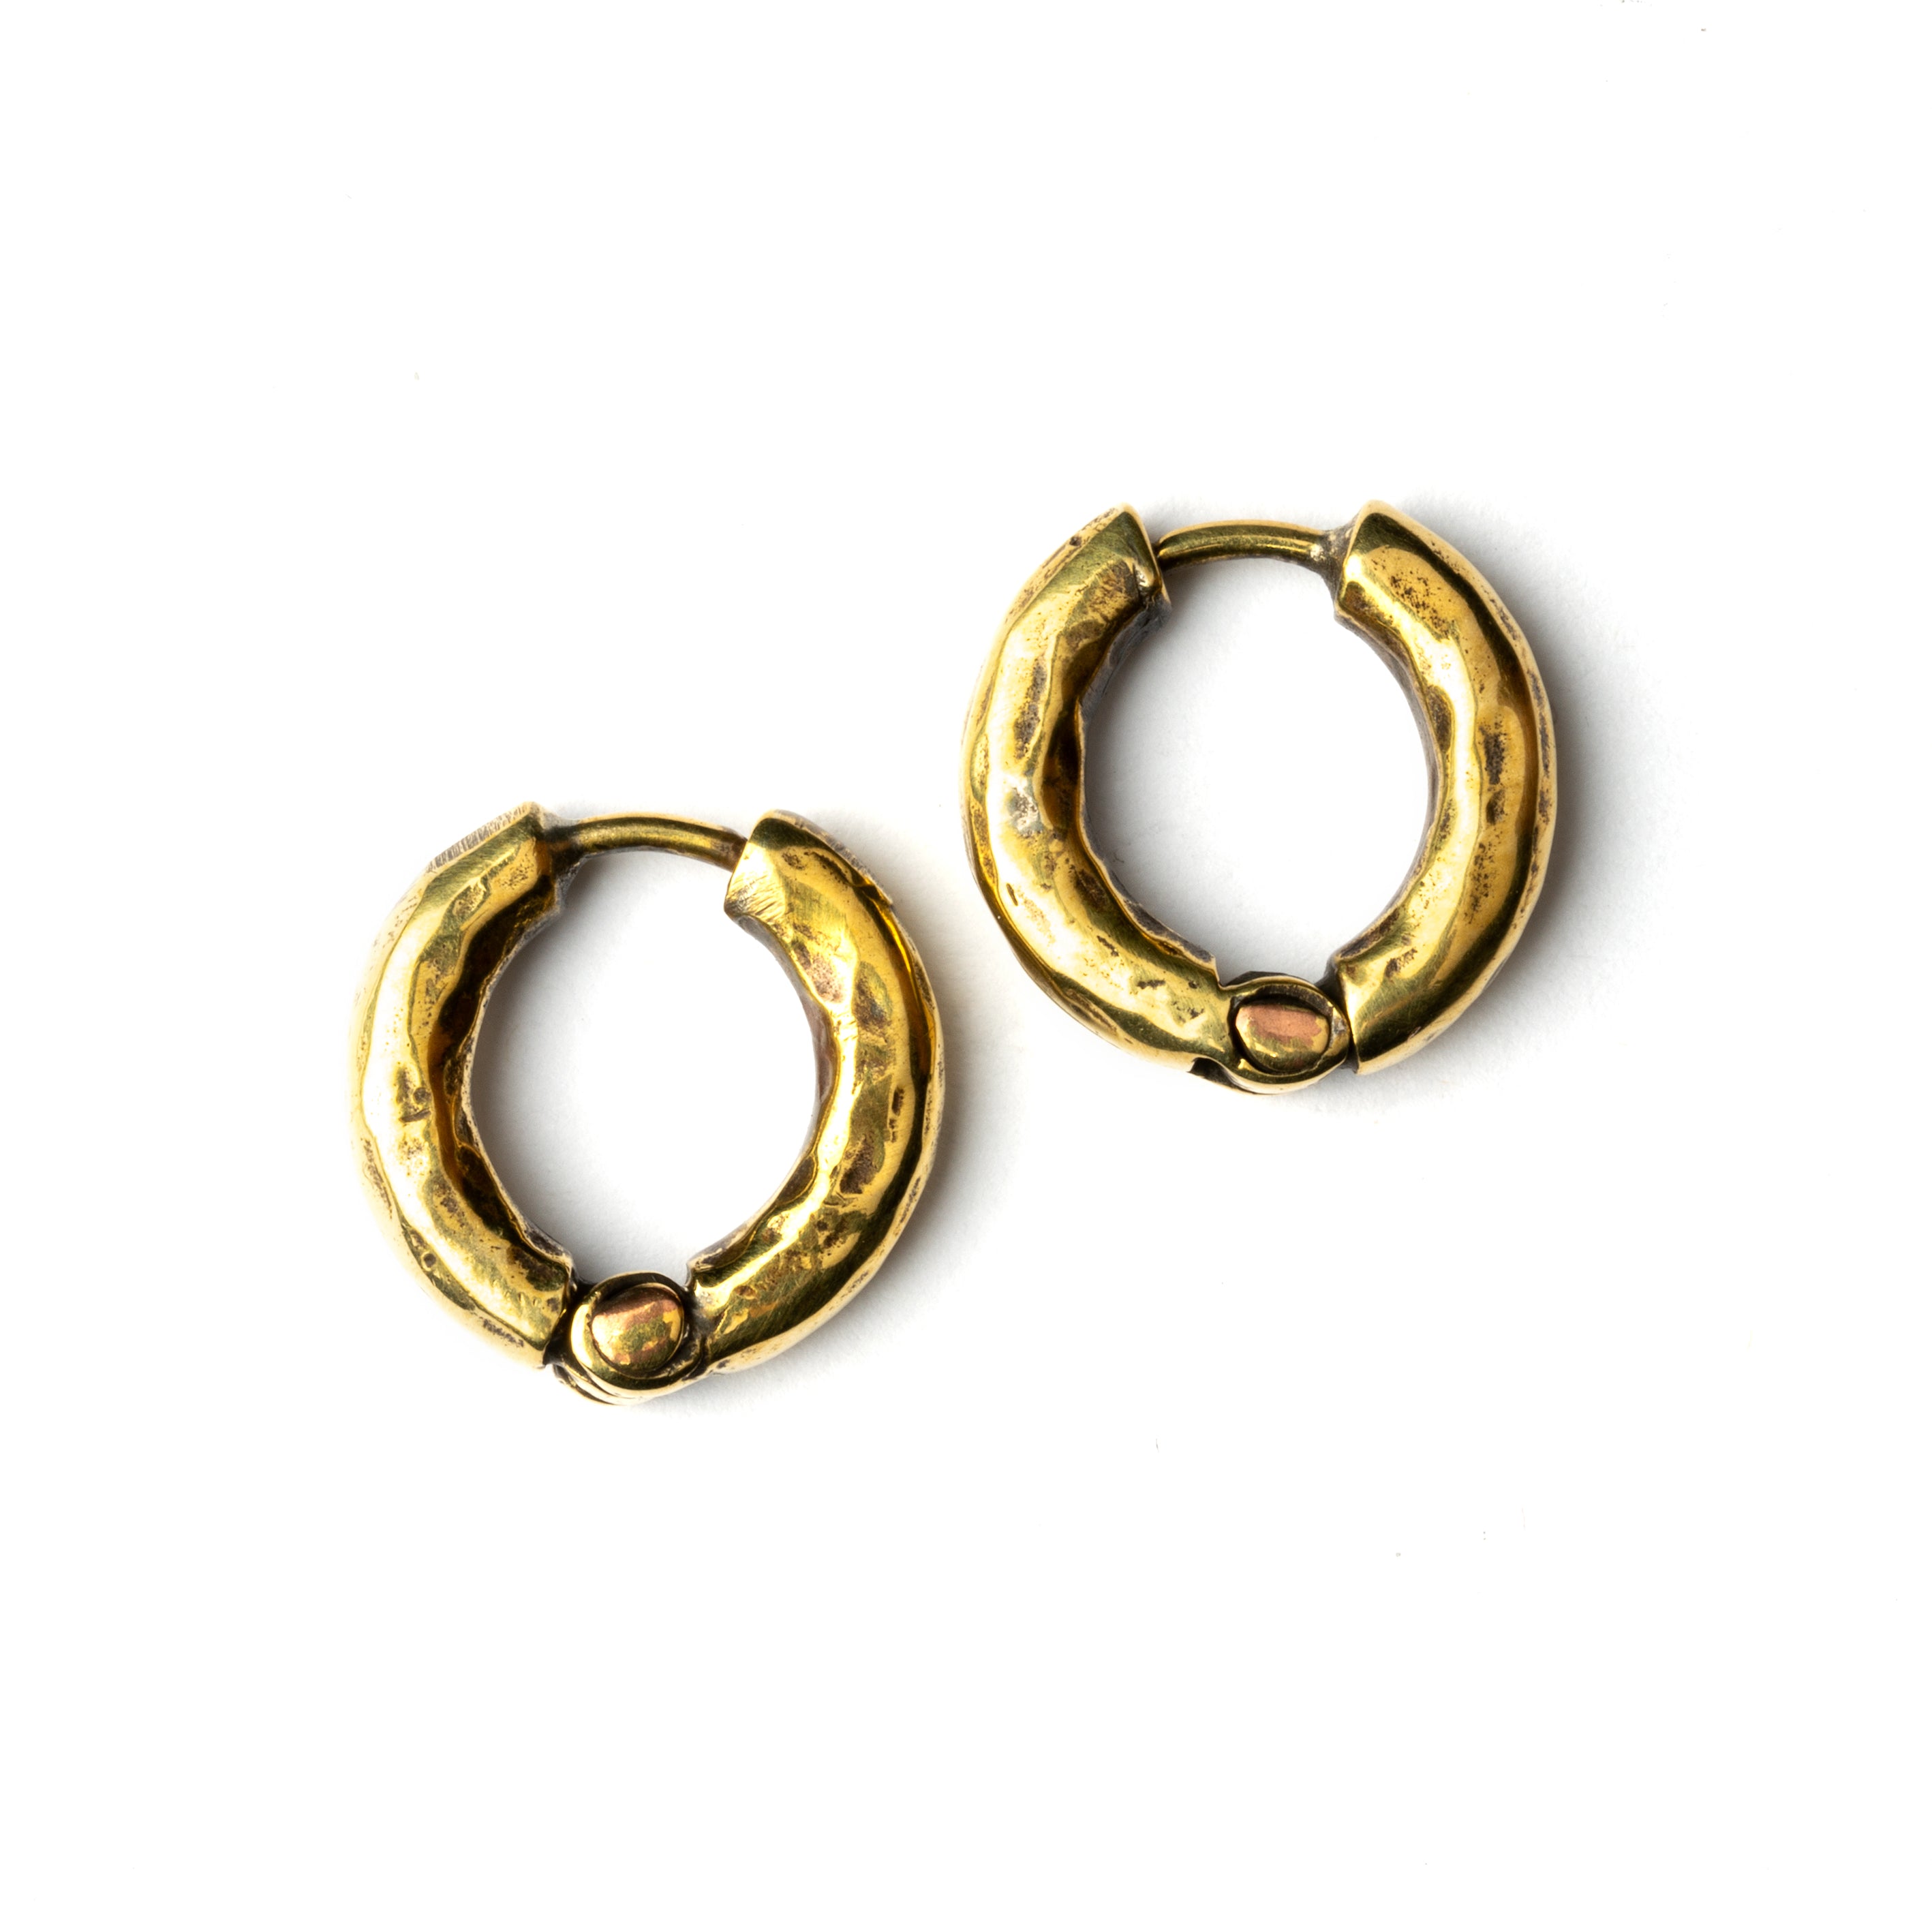 HammeredBrassHoopEarrings_small_3_619bc95b-6f38-4d8c-bcc0-15c43bf2c0df